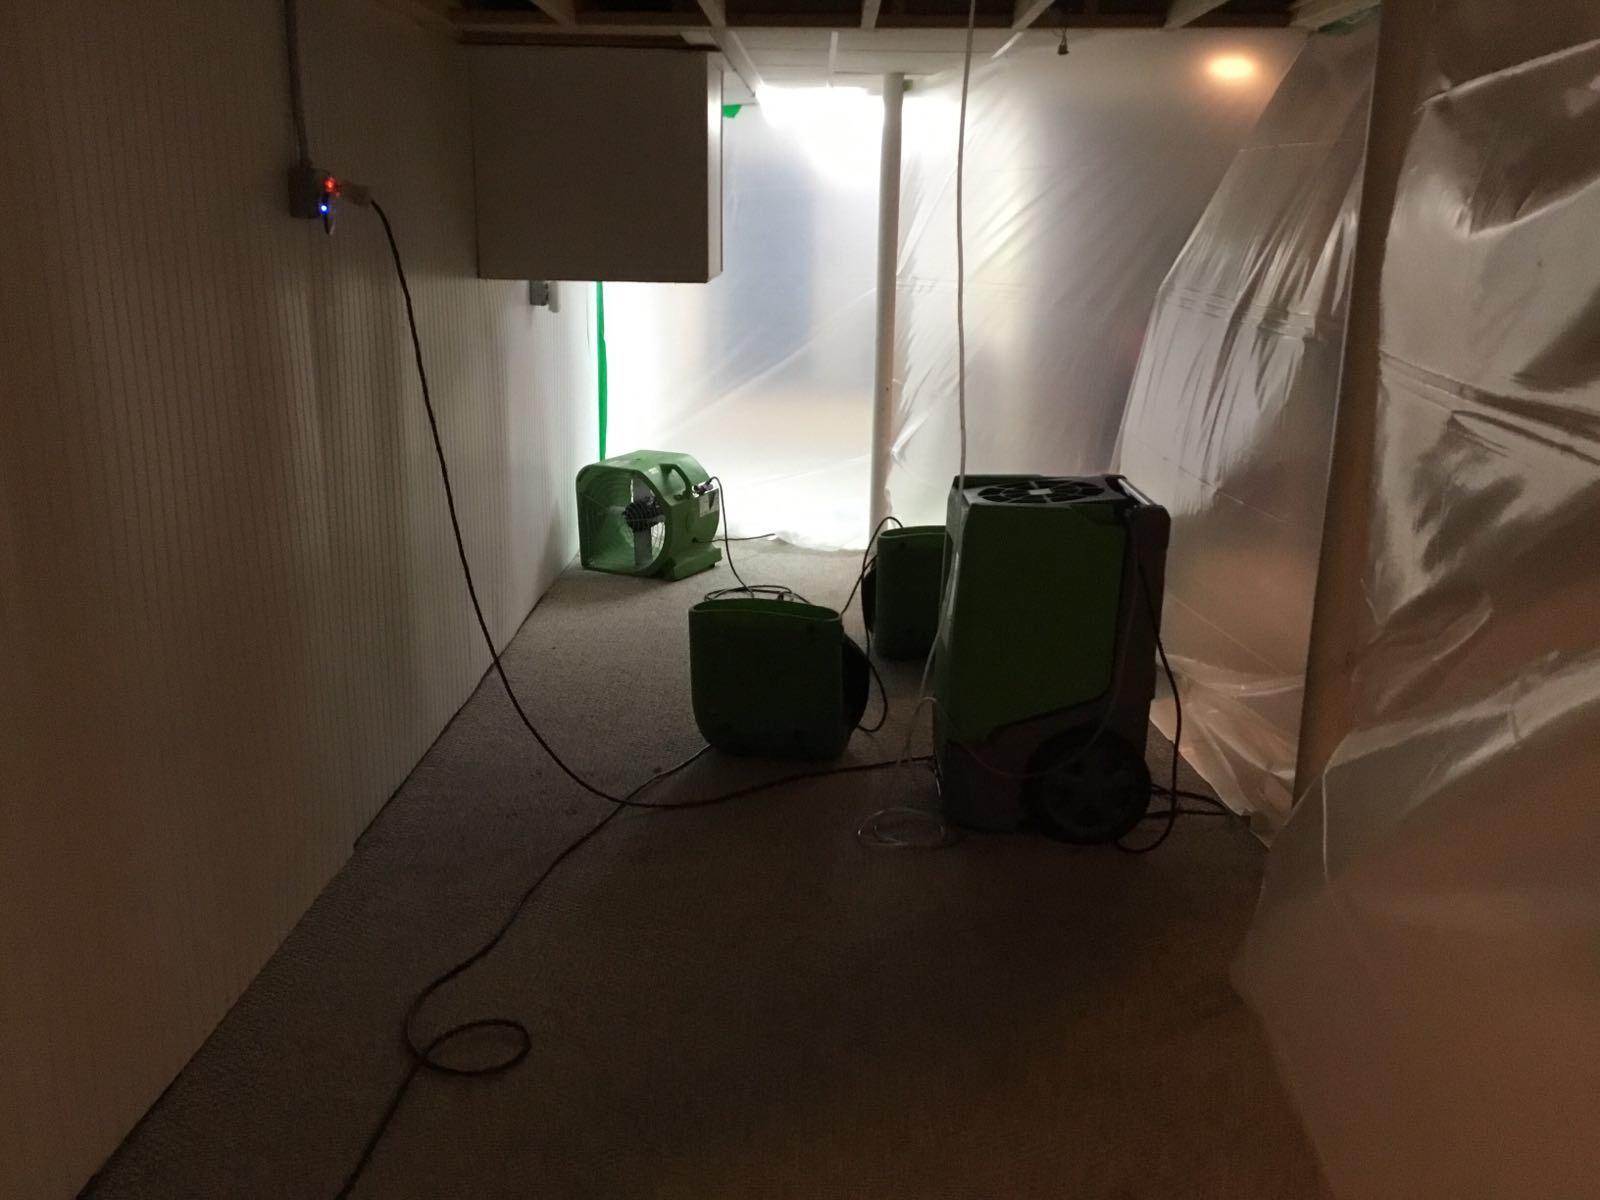 The SERVPRO equipment is up and running after a residential loss.